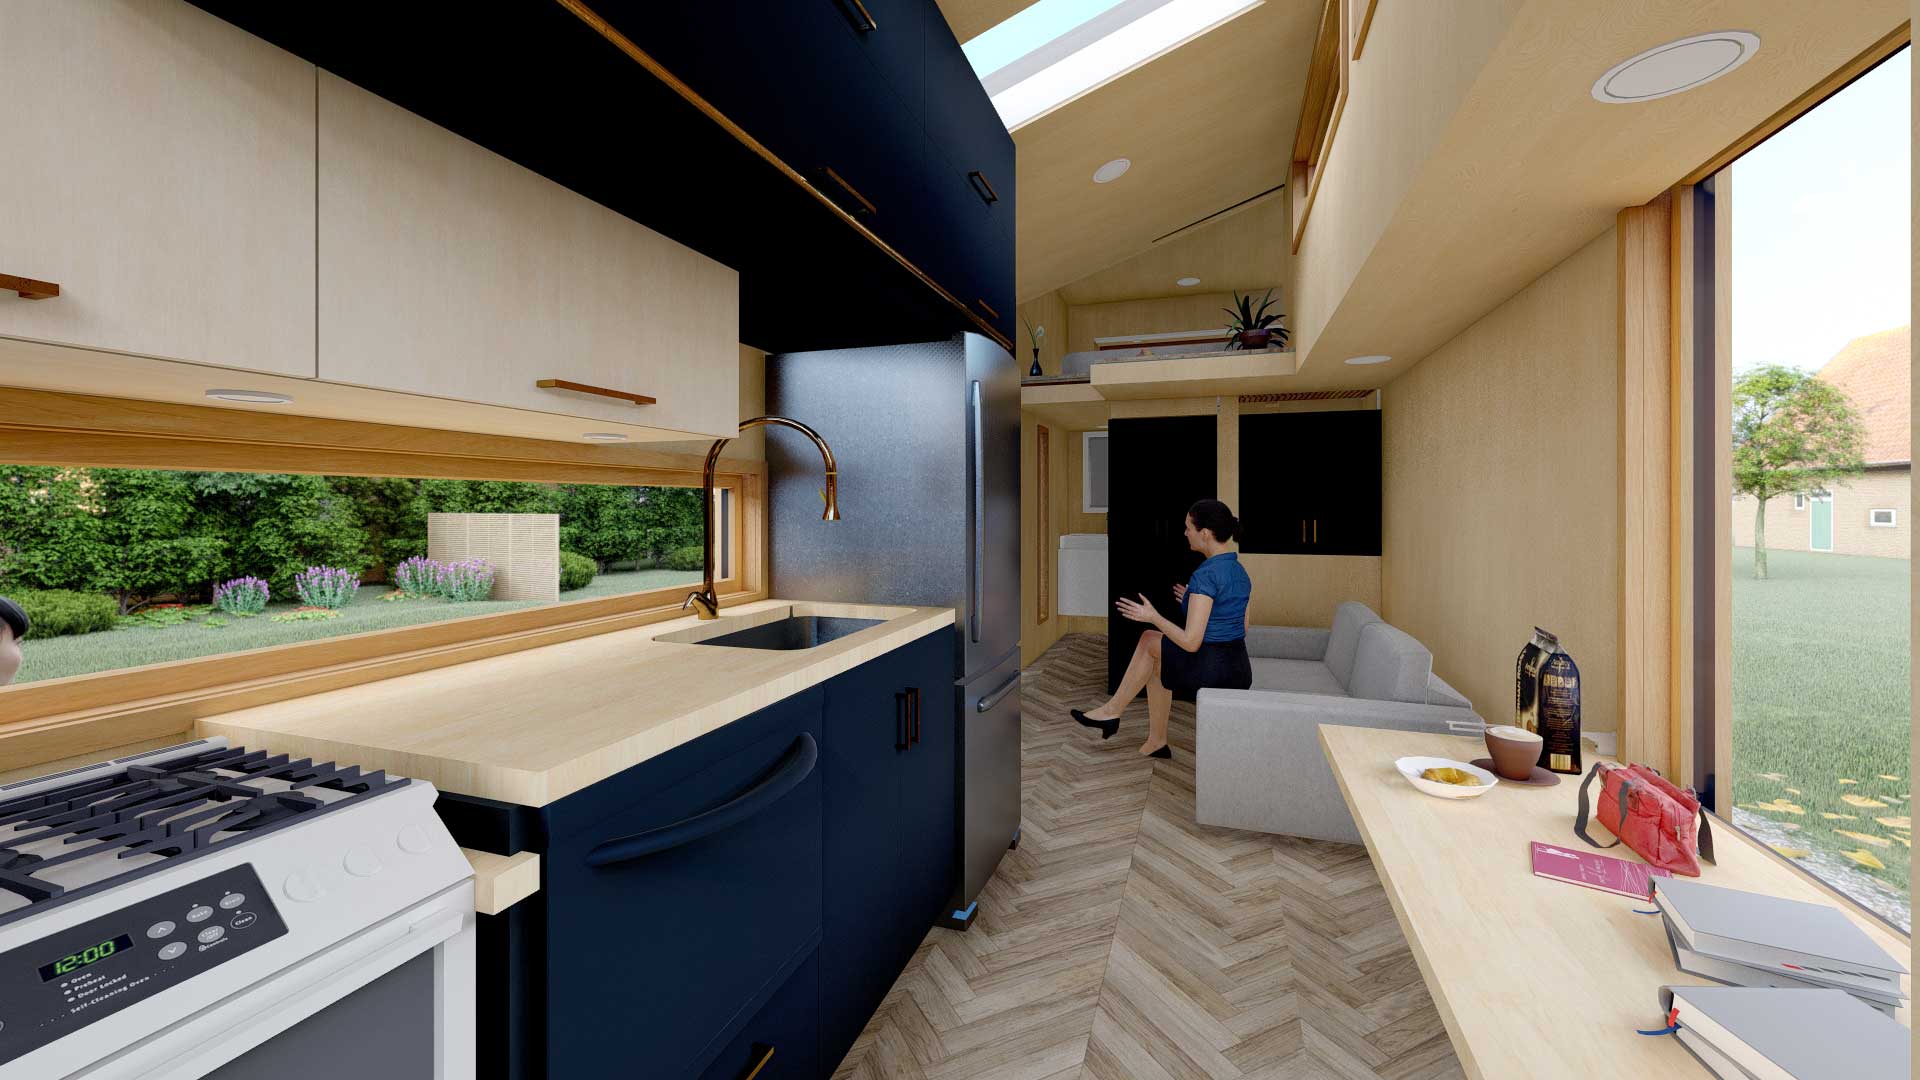 Interior 3D model of Journey tiny home with kitchen and person sitting reading on a couch